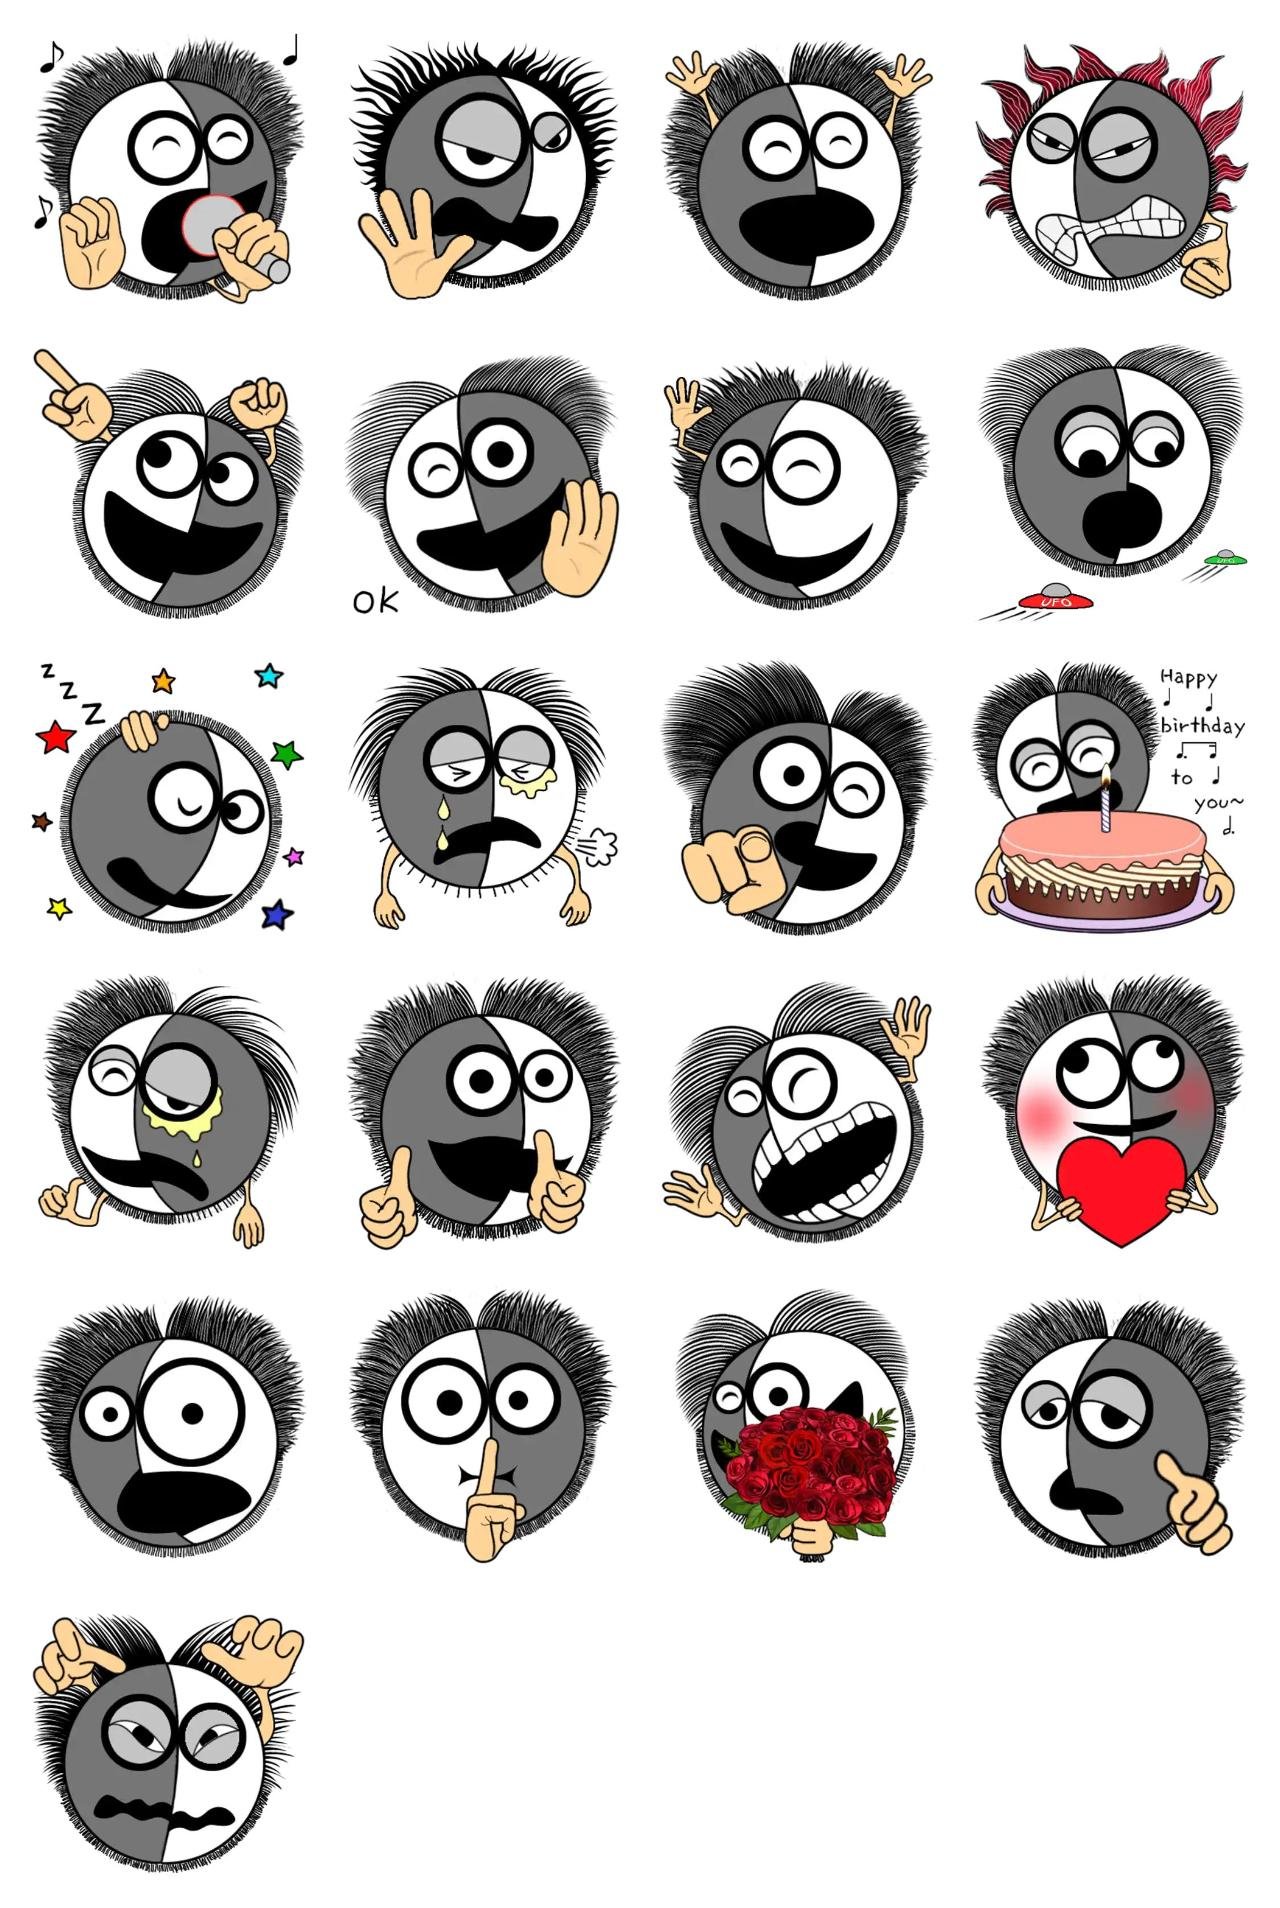 Yawning Moon 2 Animation/Cartoon sticker pack for Whatsapp, Telegram, Signal, and others chatting and message apps